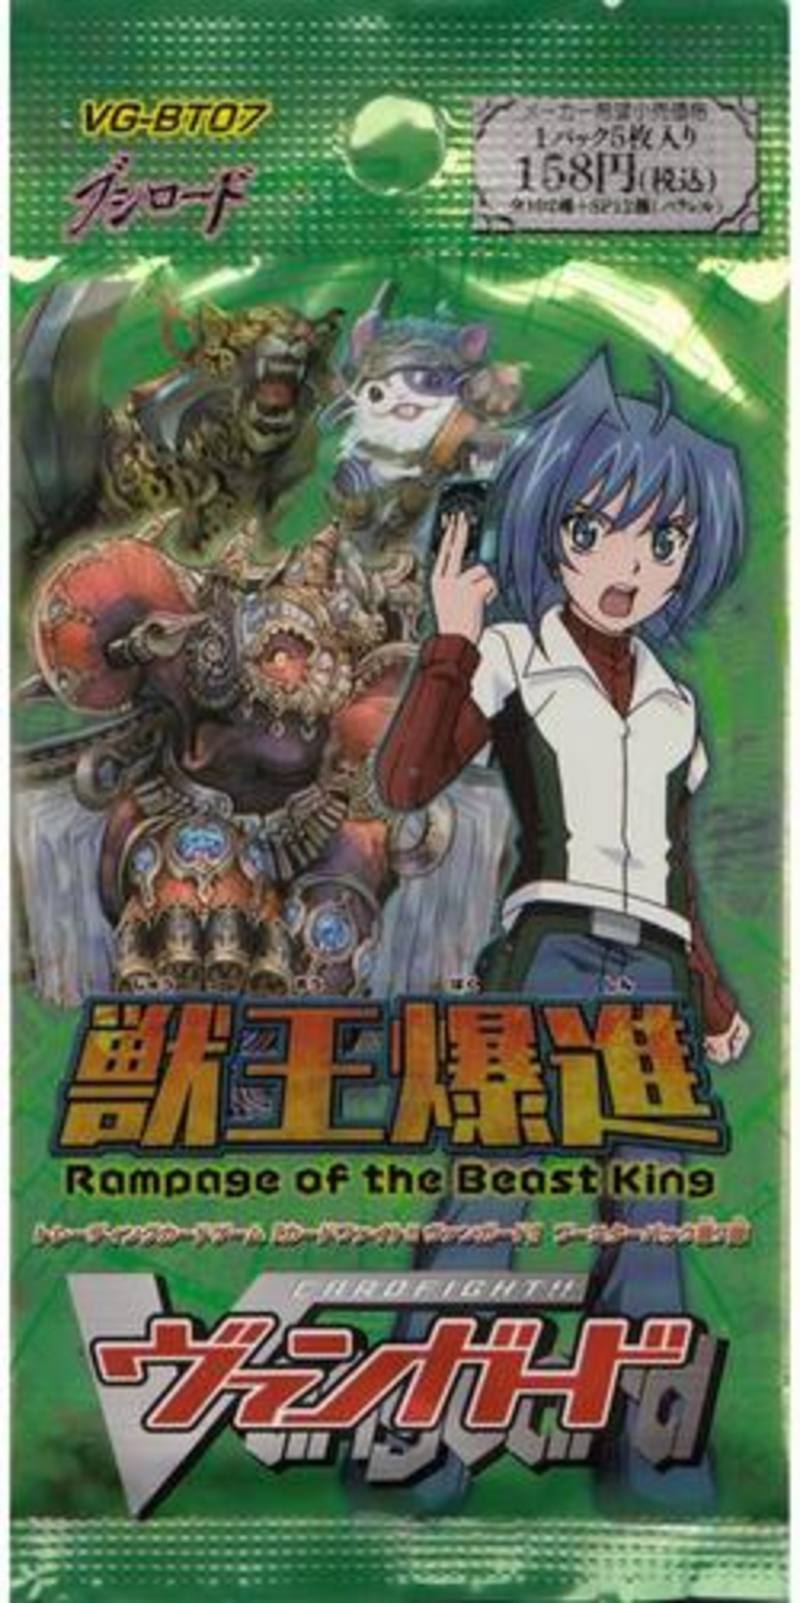 Cardfight!! Vanguard: Rampage of the Beast King Booster 